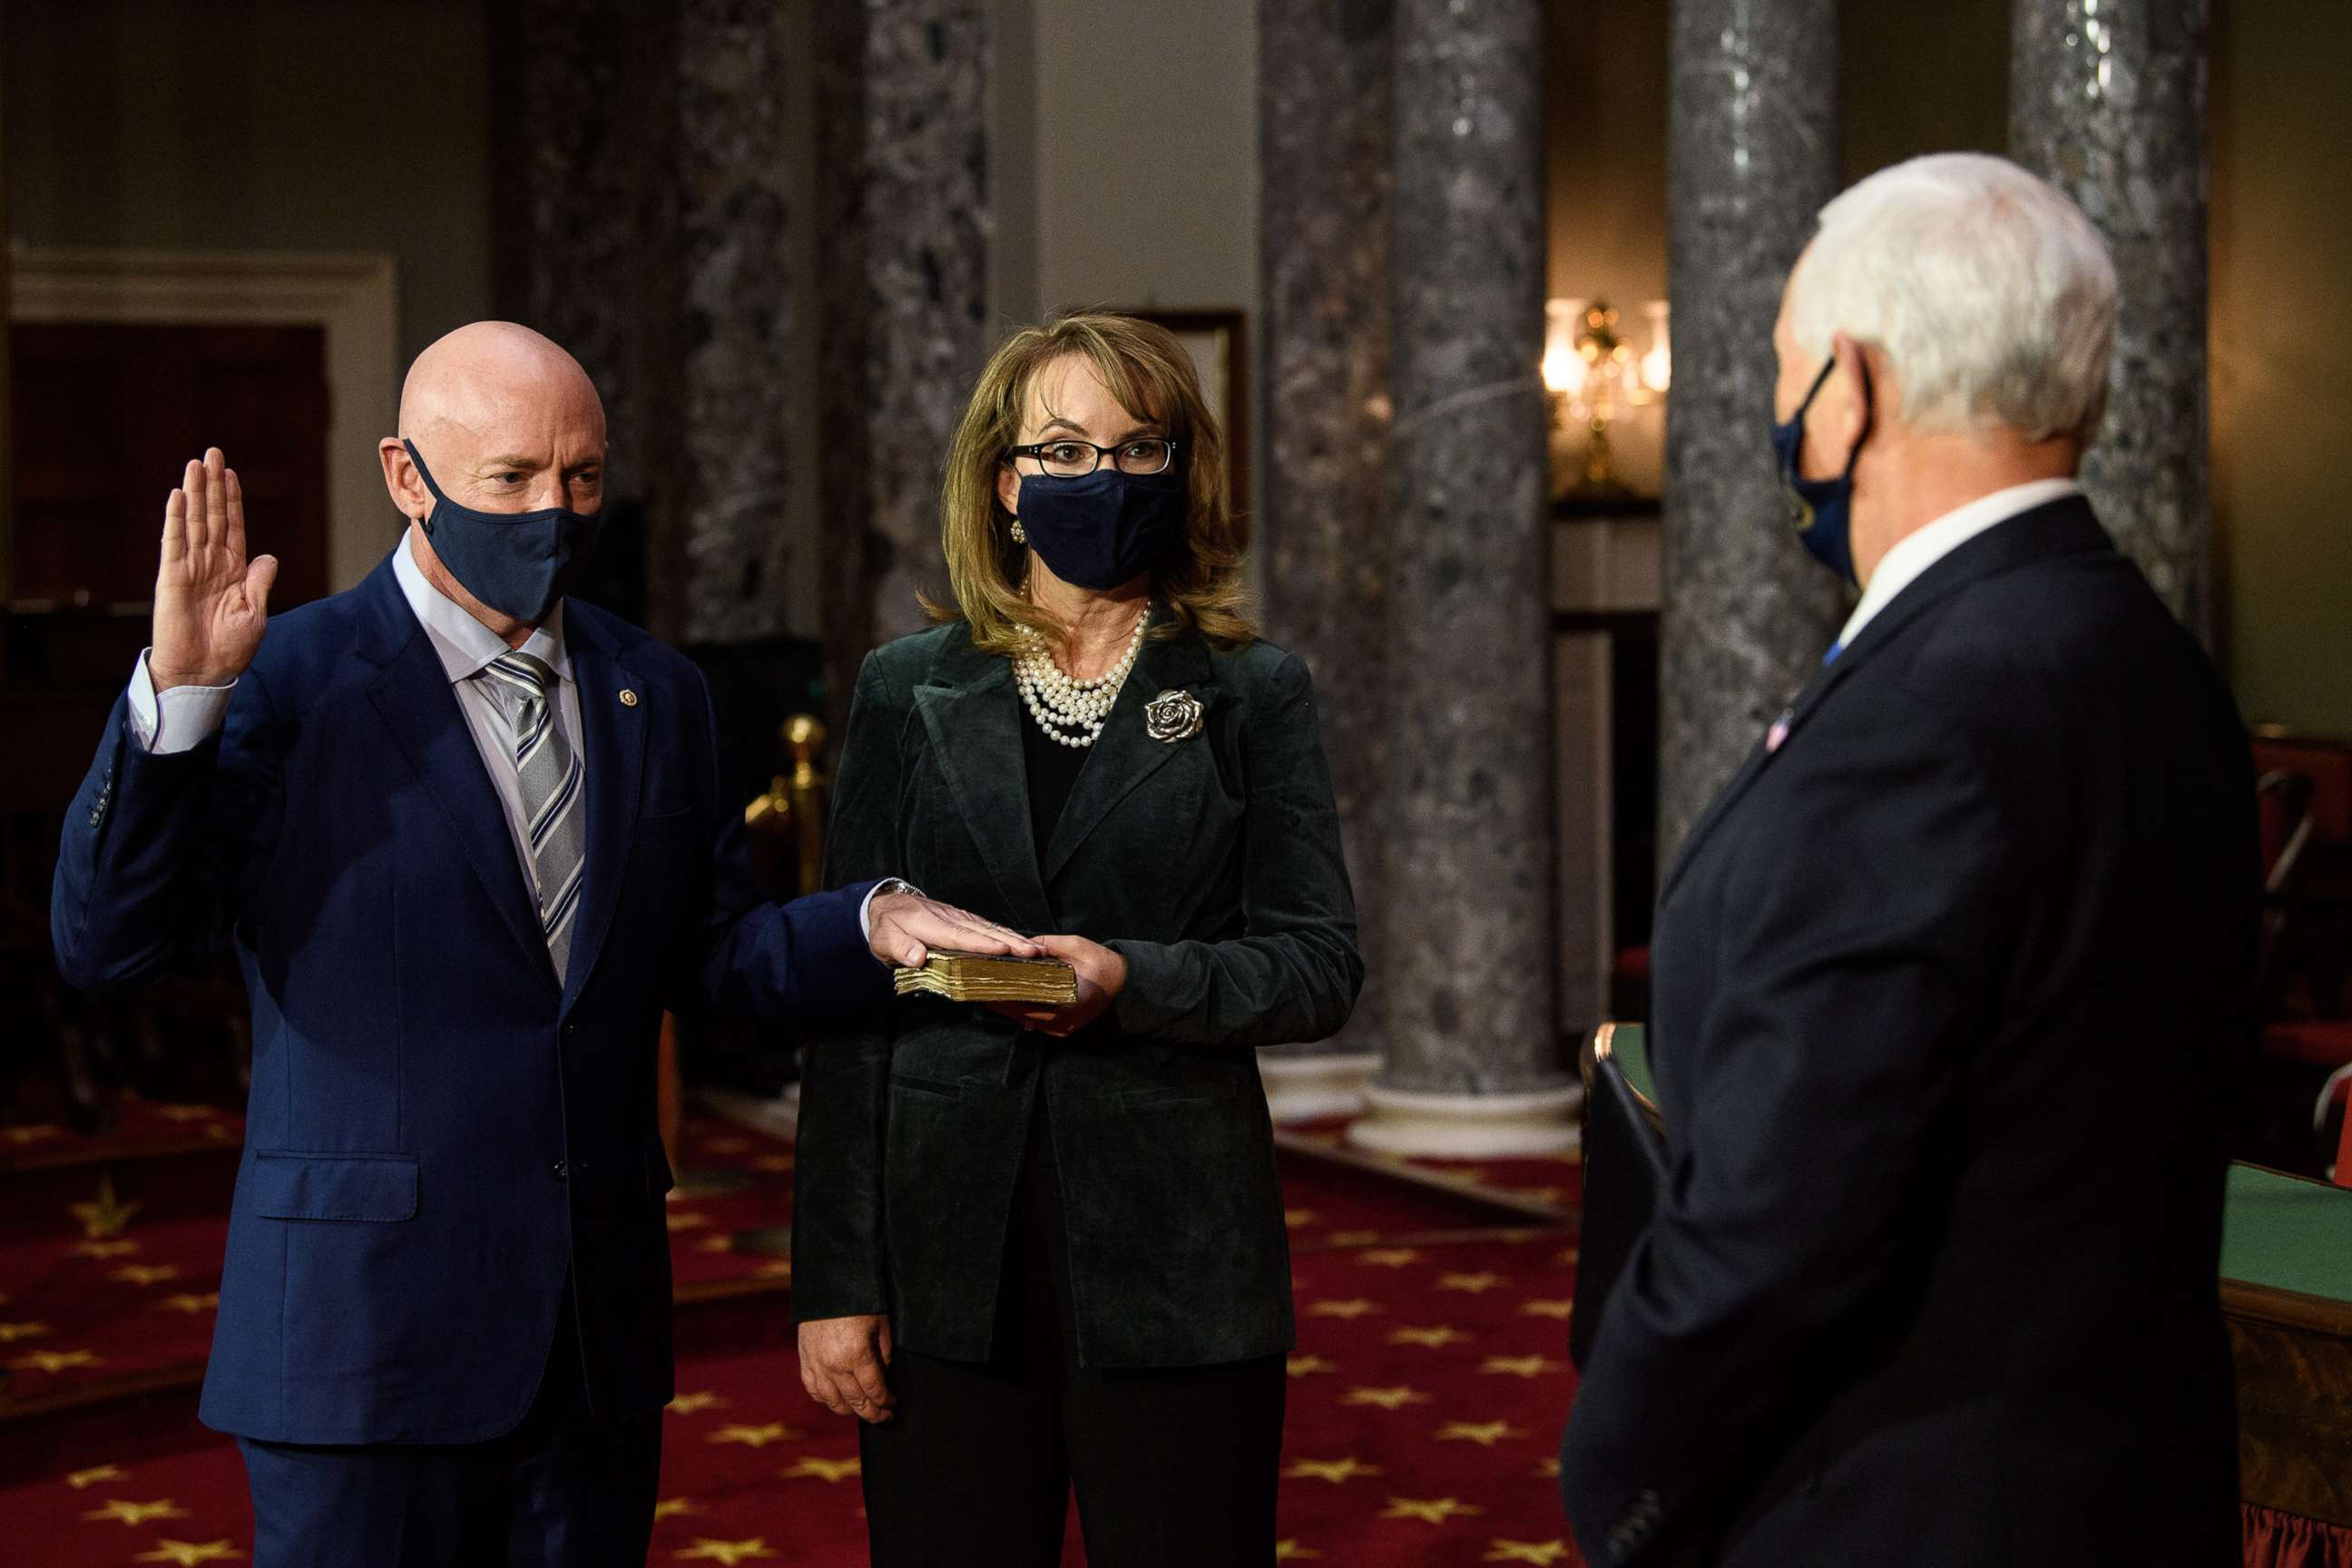 PHOTO: Vice President Mike Pence, Senator Mark Kelly (D-AZ) and Kelly's wife former Rep. Gabby Giffords participate in a swearing in reenactment at the Capitol, Dec. 2, 2020.